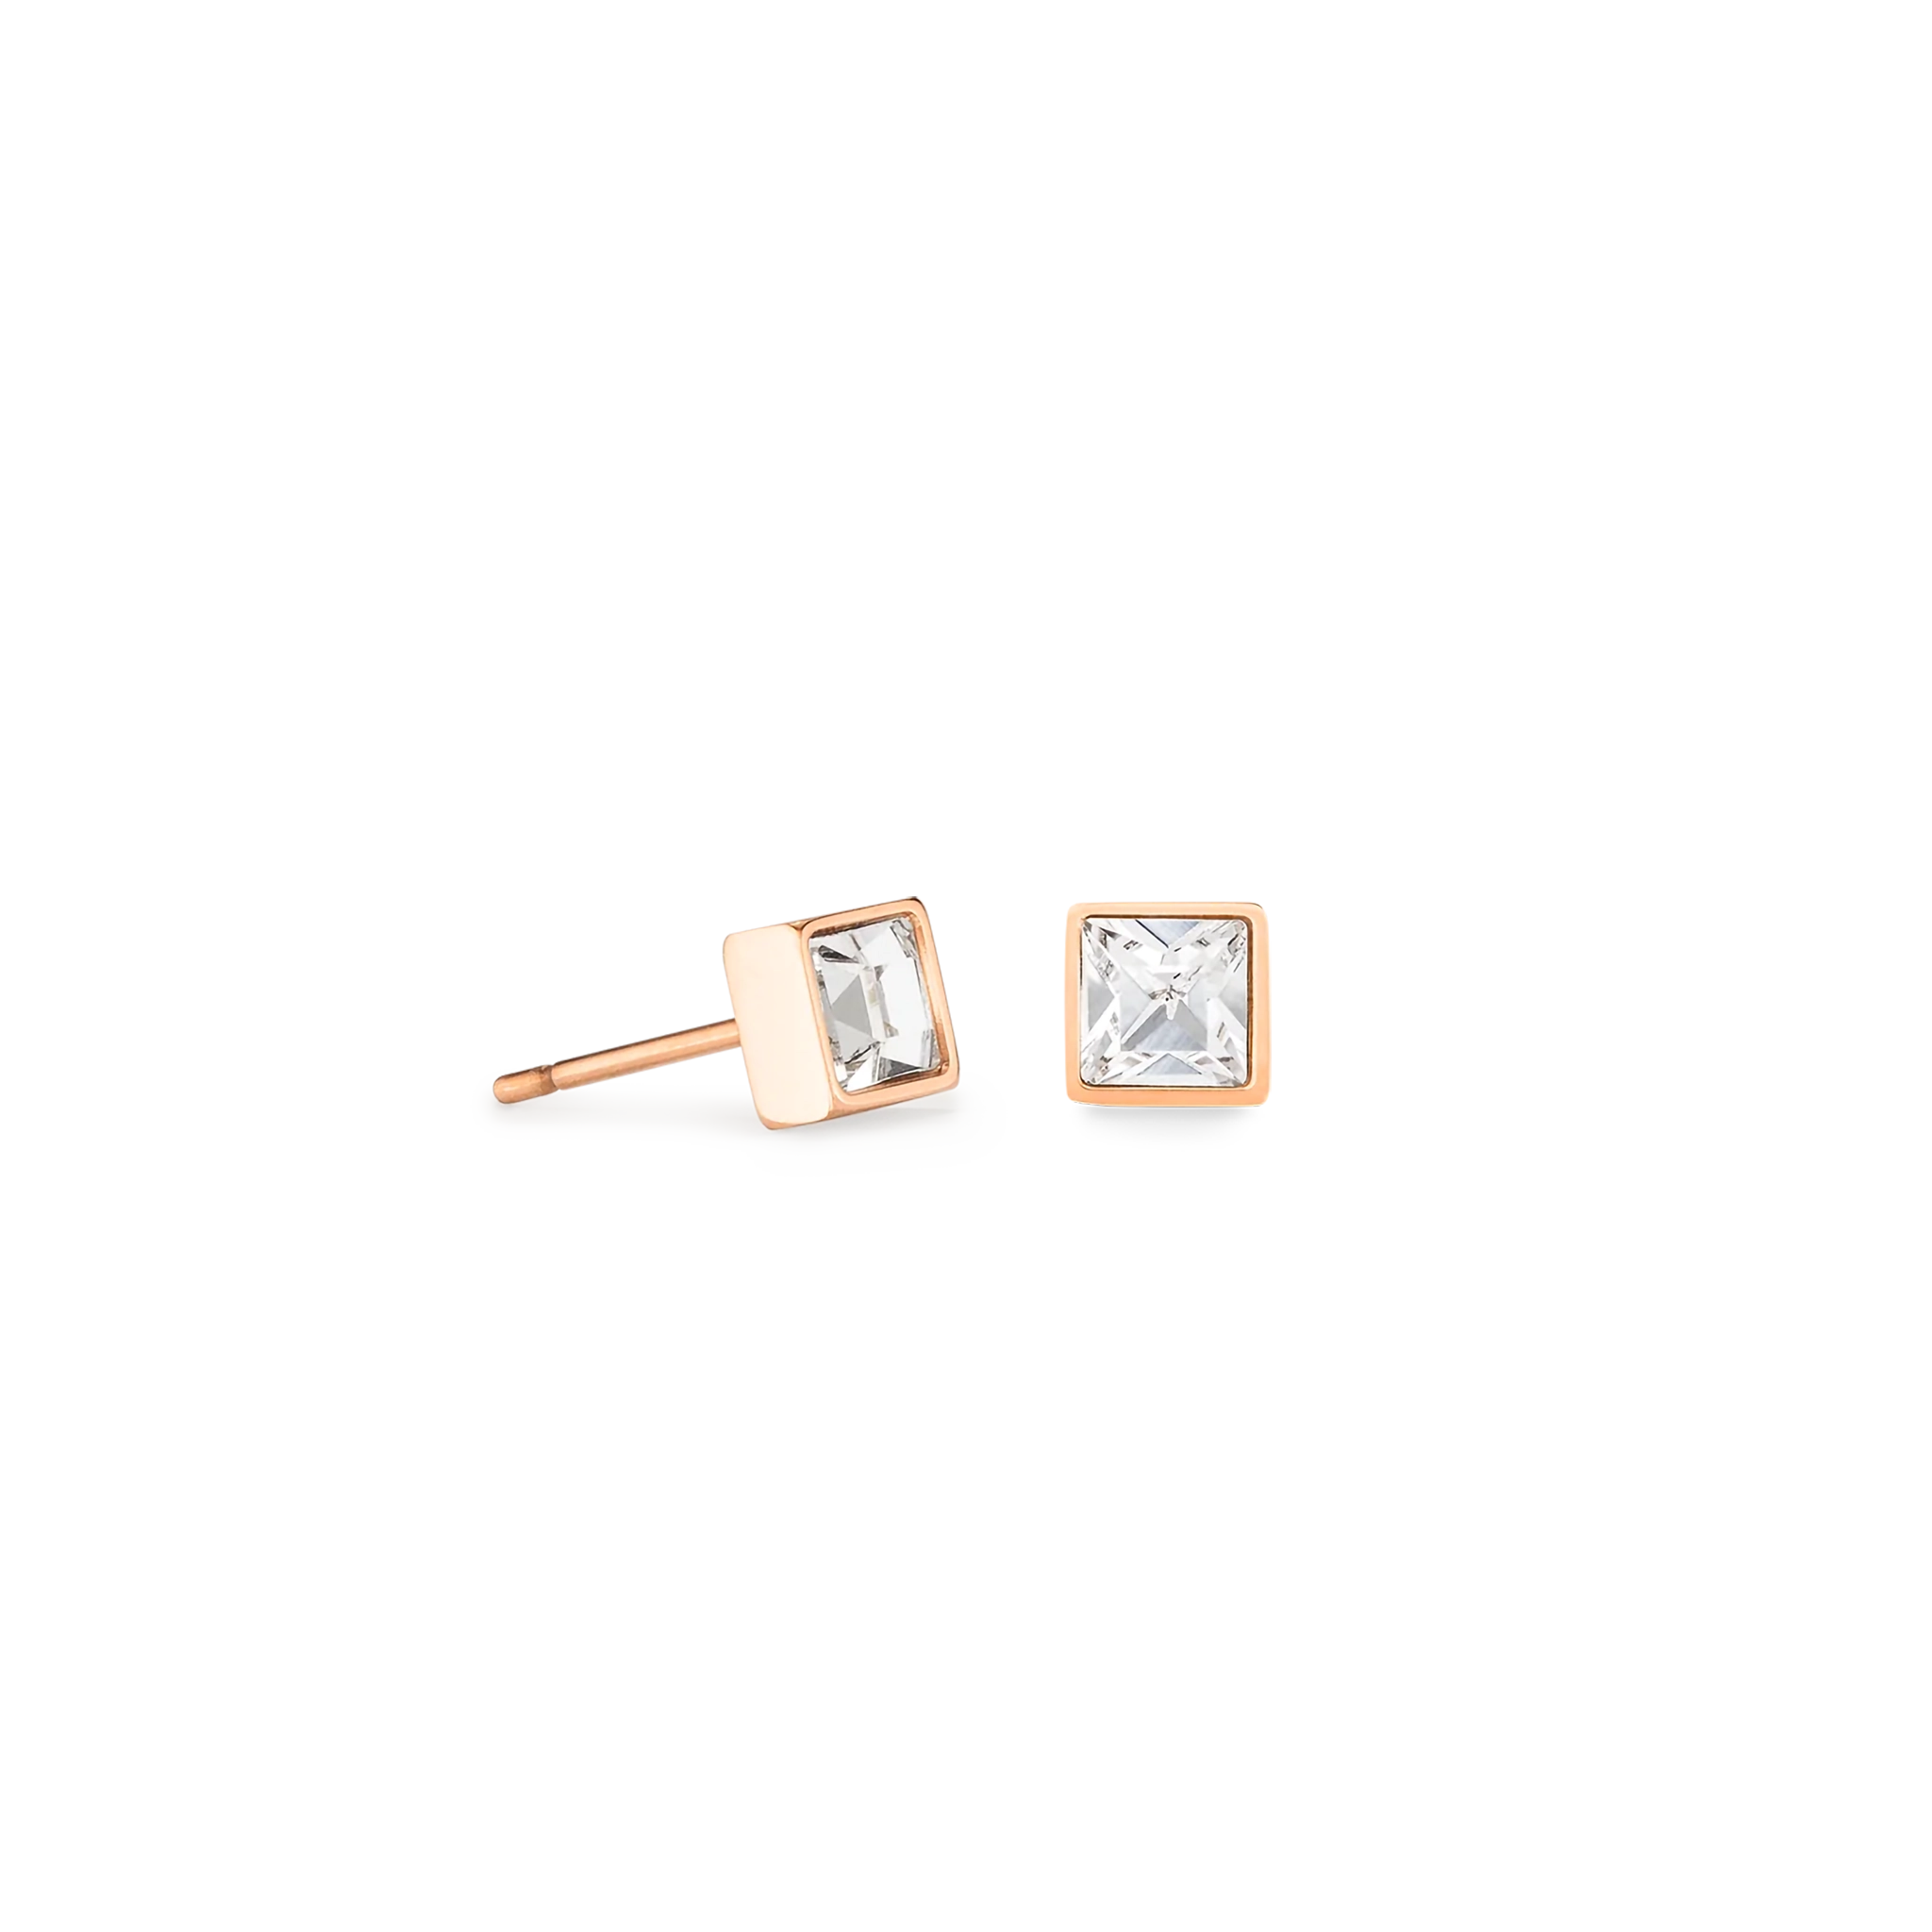 A pair of square rose gold stud earrings featuring an white crystal stone